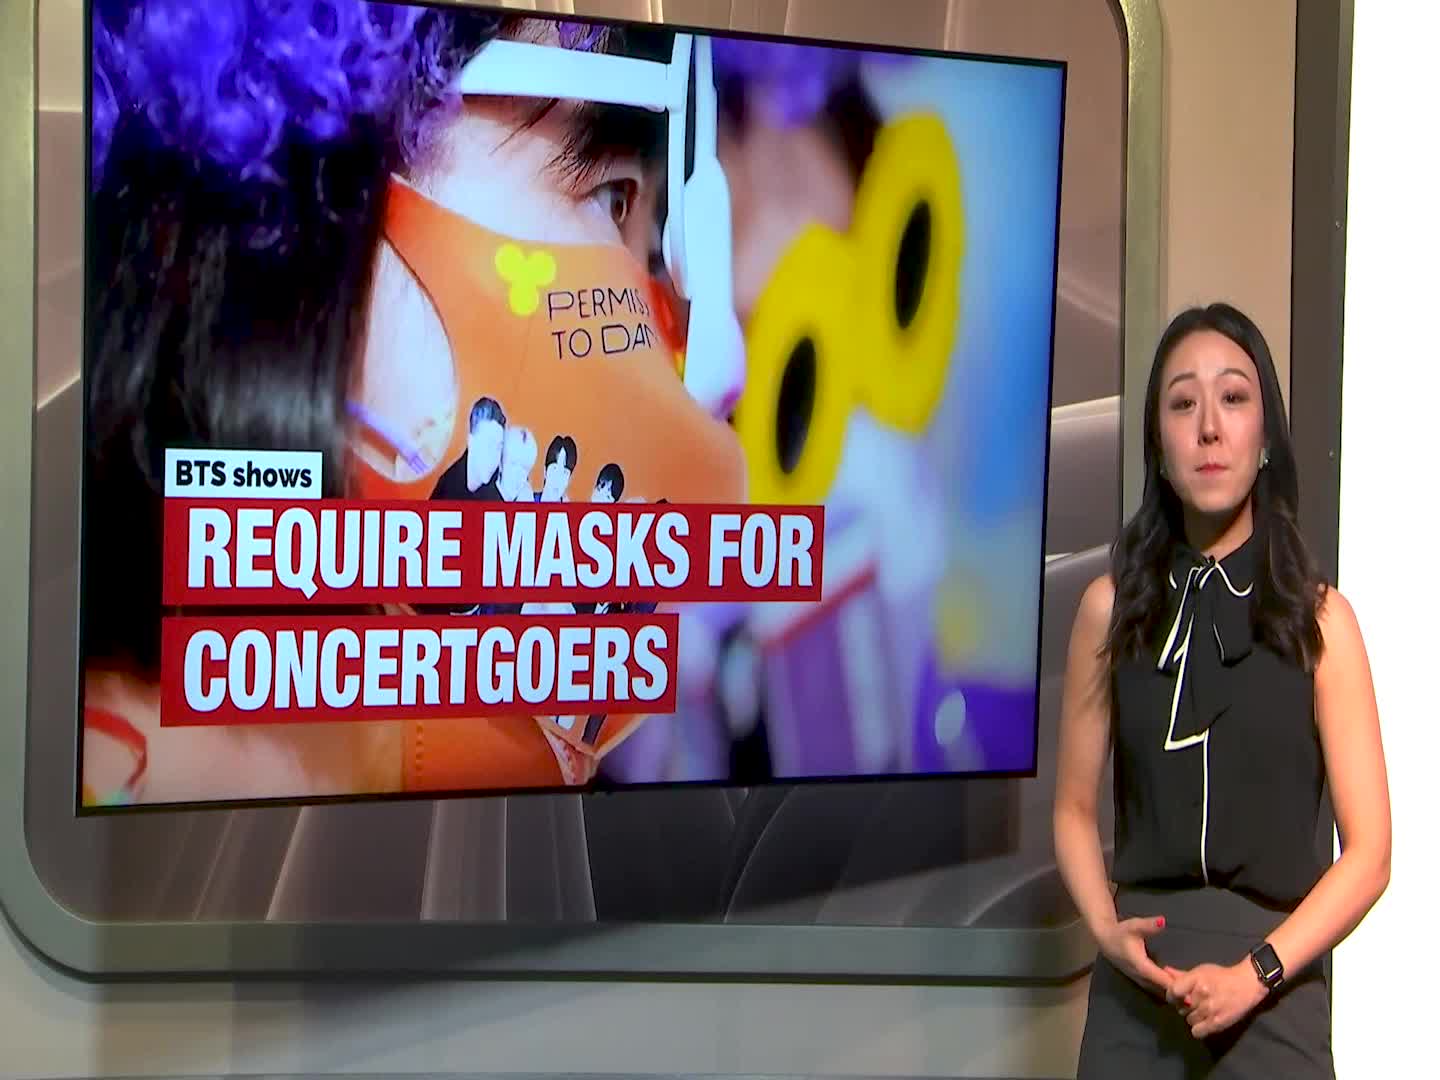 BTS Concerts: Mask Required